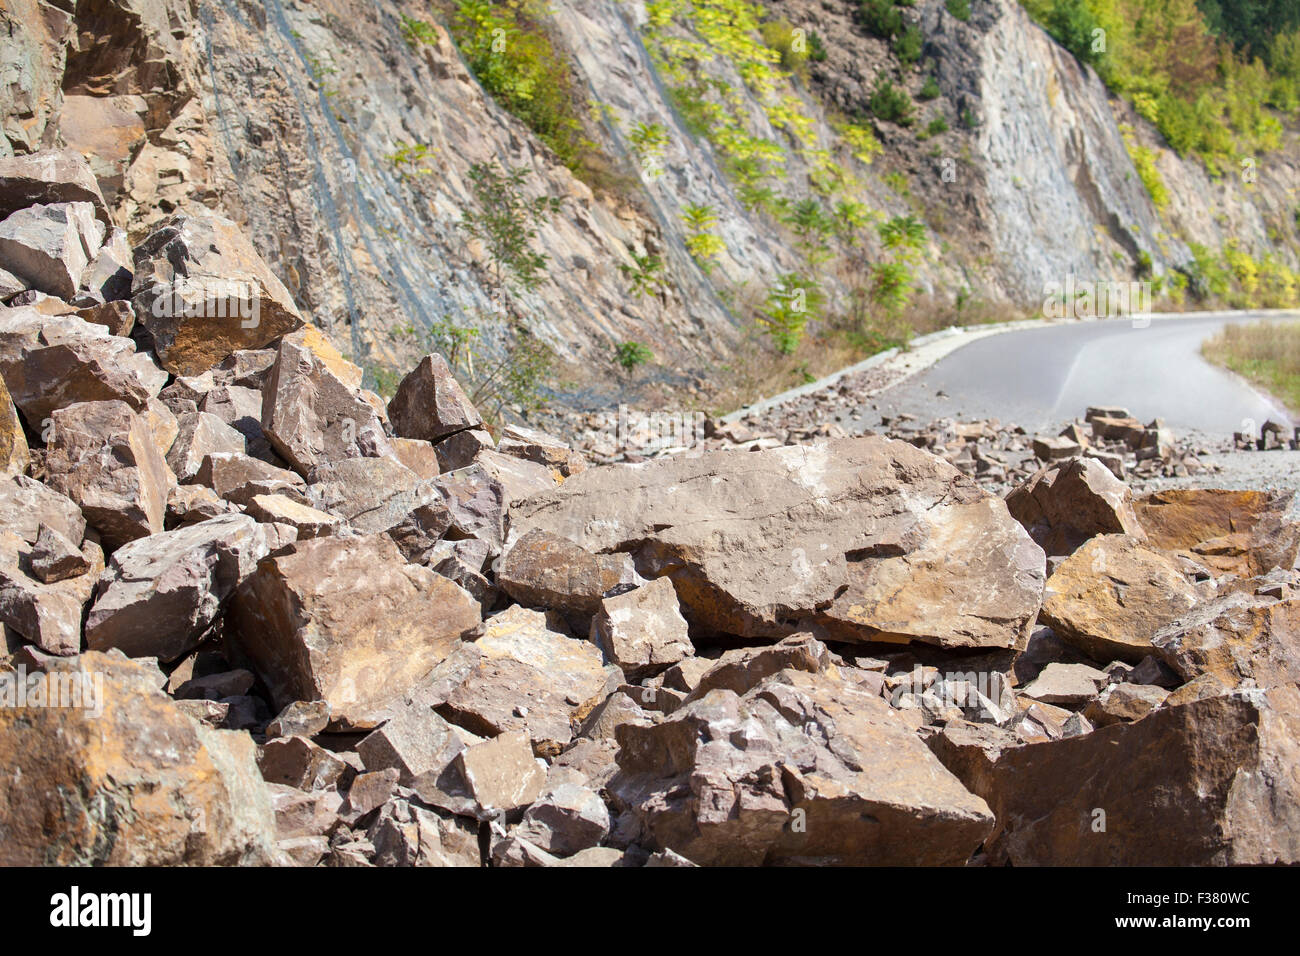 Image of a closed road by a pile of fallen big and small stones. This dangerous accident is caused by a landslide. Stock Photo